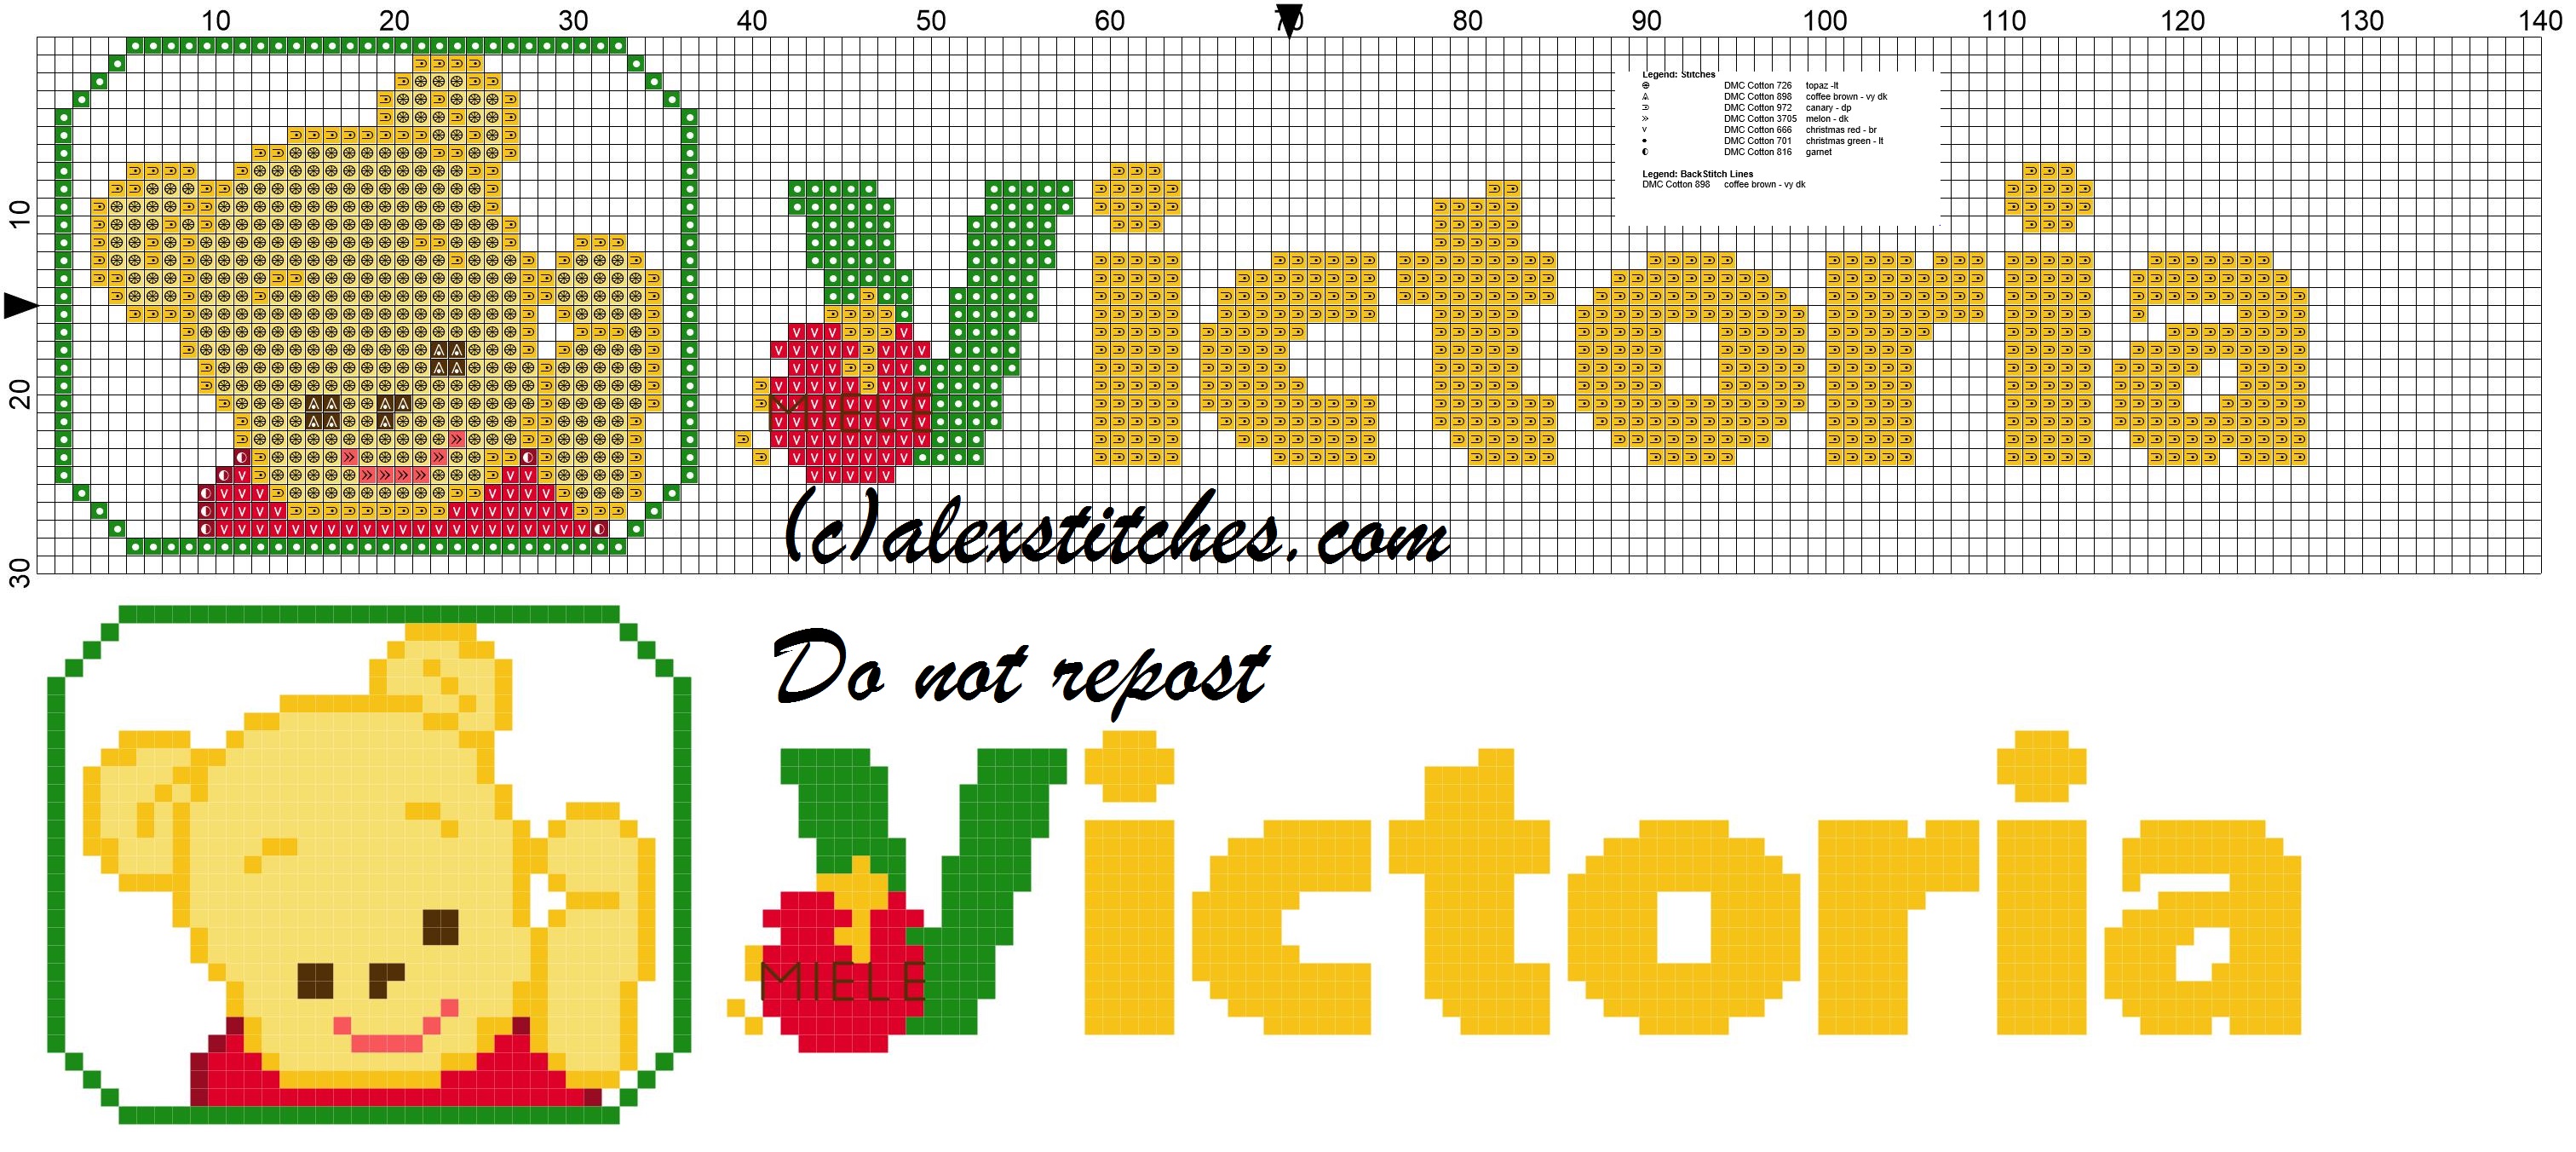 Victoria name with Baby winnie the pooh free cross stitches pattern